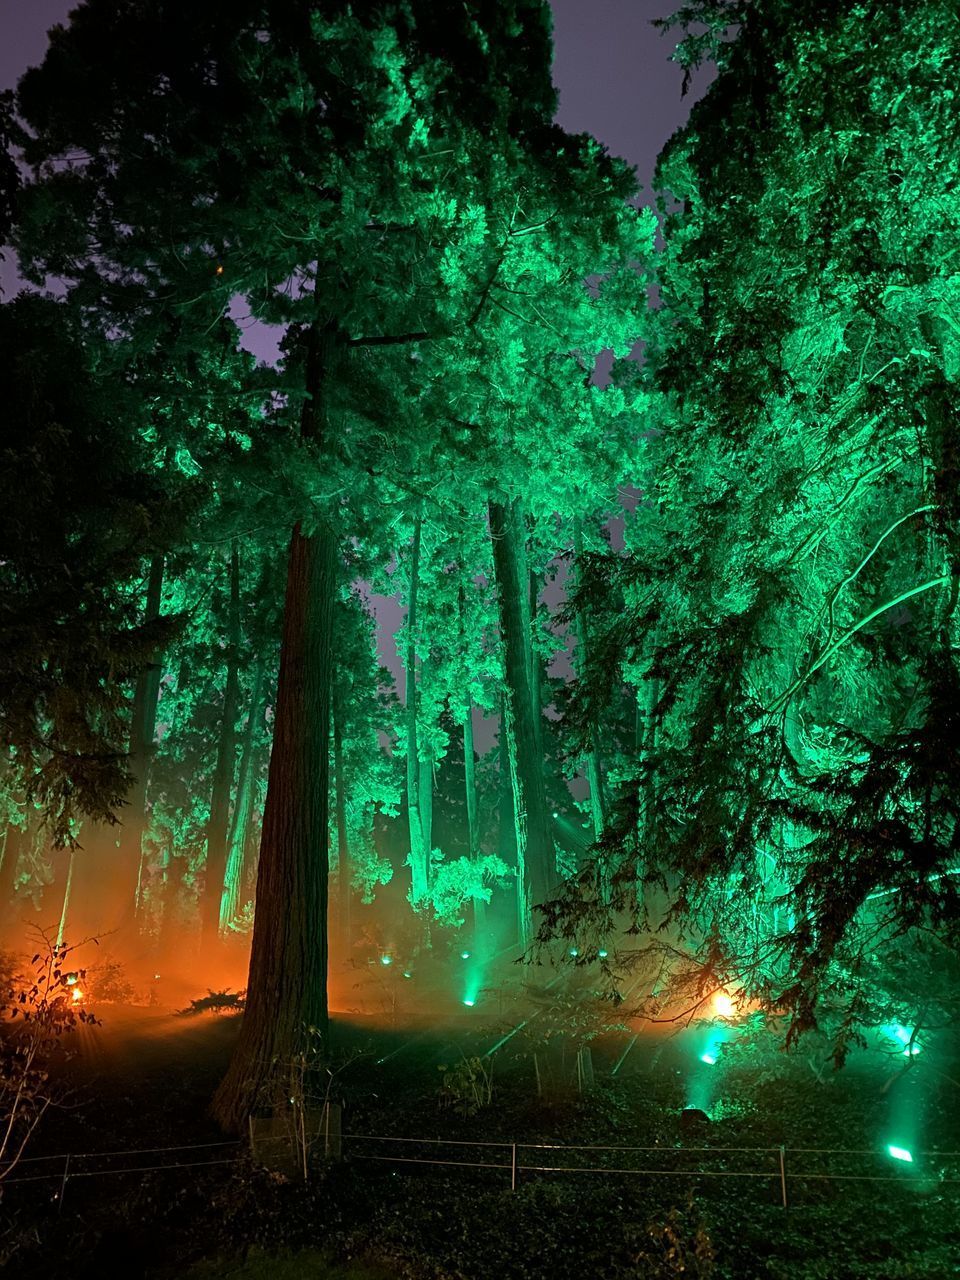 VIEW OF ILLUMINATED TREES IN FOREST